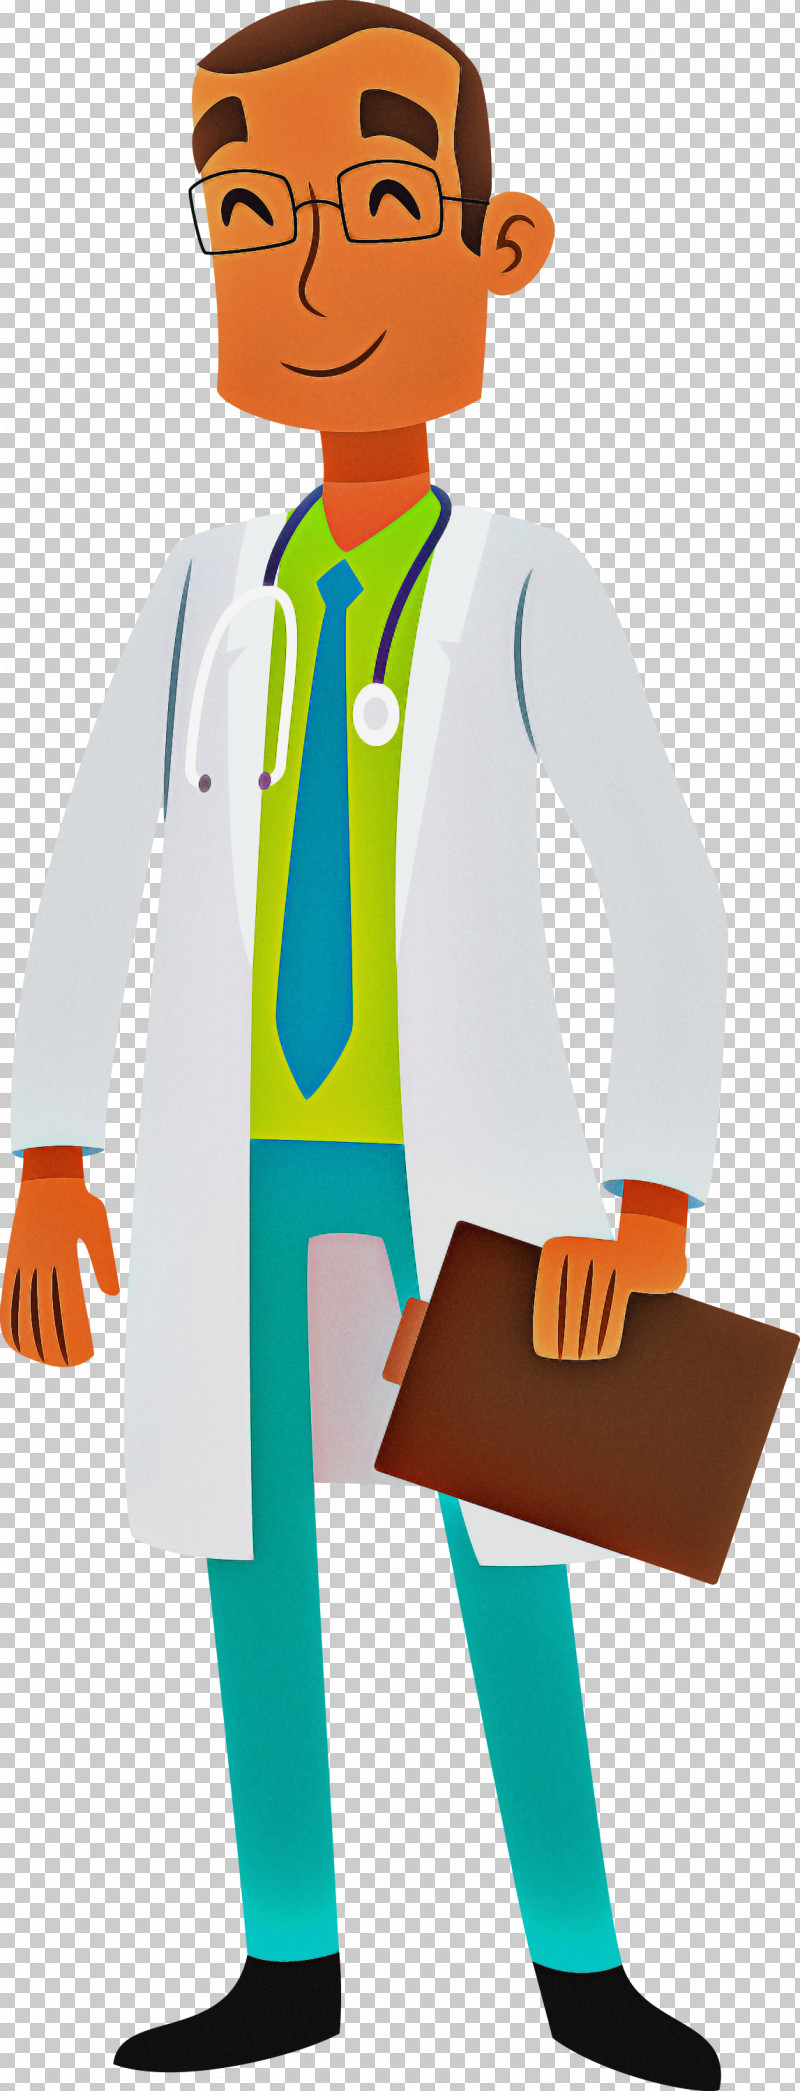 Health Behavior Physician Planning Psychology PNG, Clipart, Behavior, Clinic, Clinical Psychology, Doctor Cartoon, Health Free PNG Download